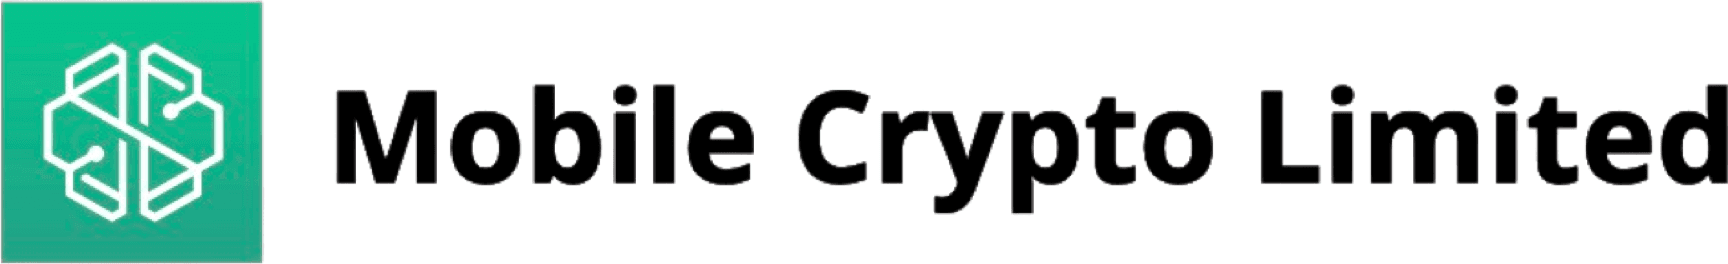 Mobile Crypto limited